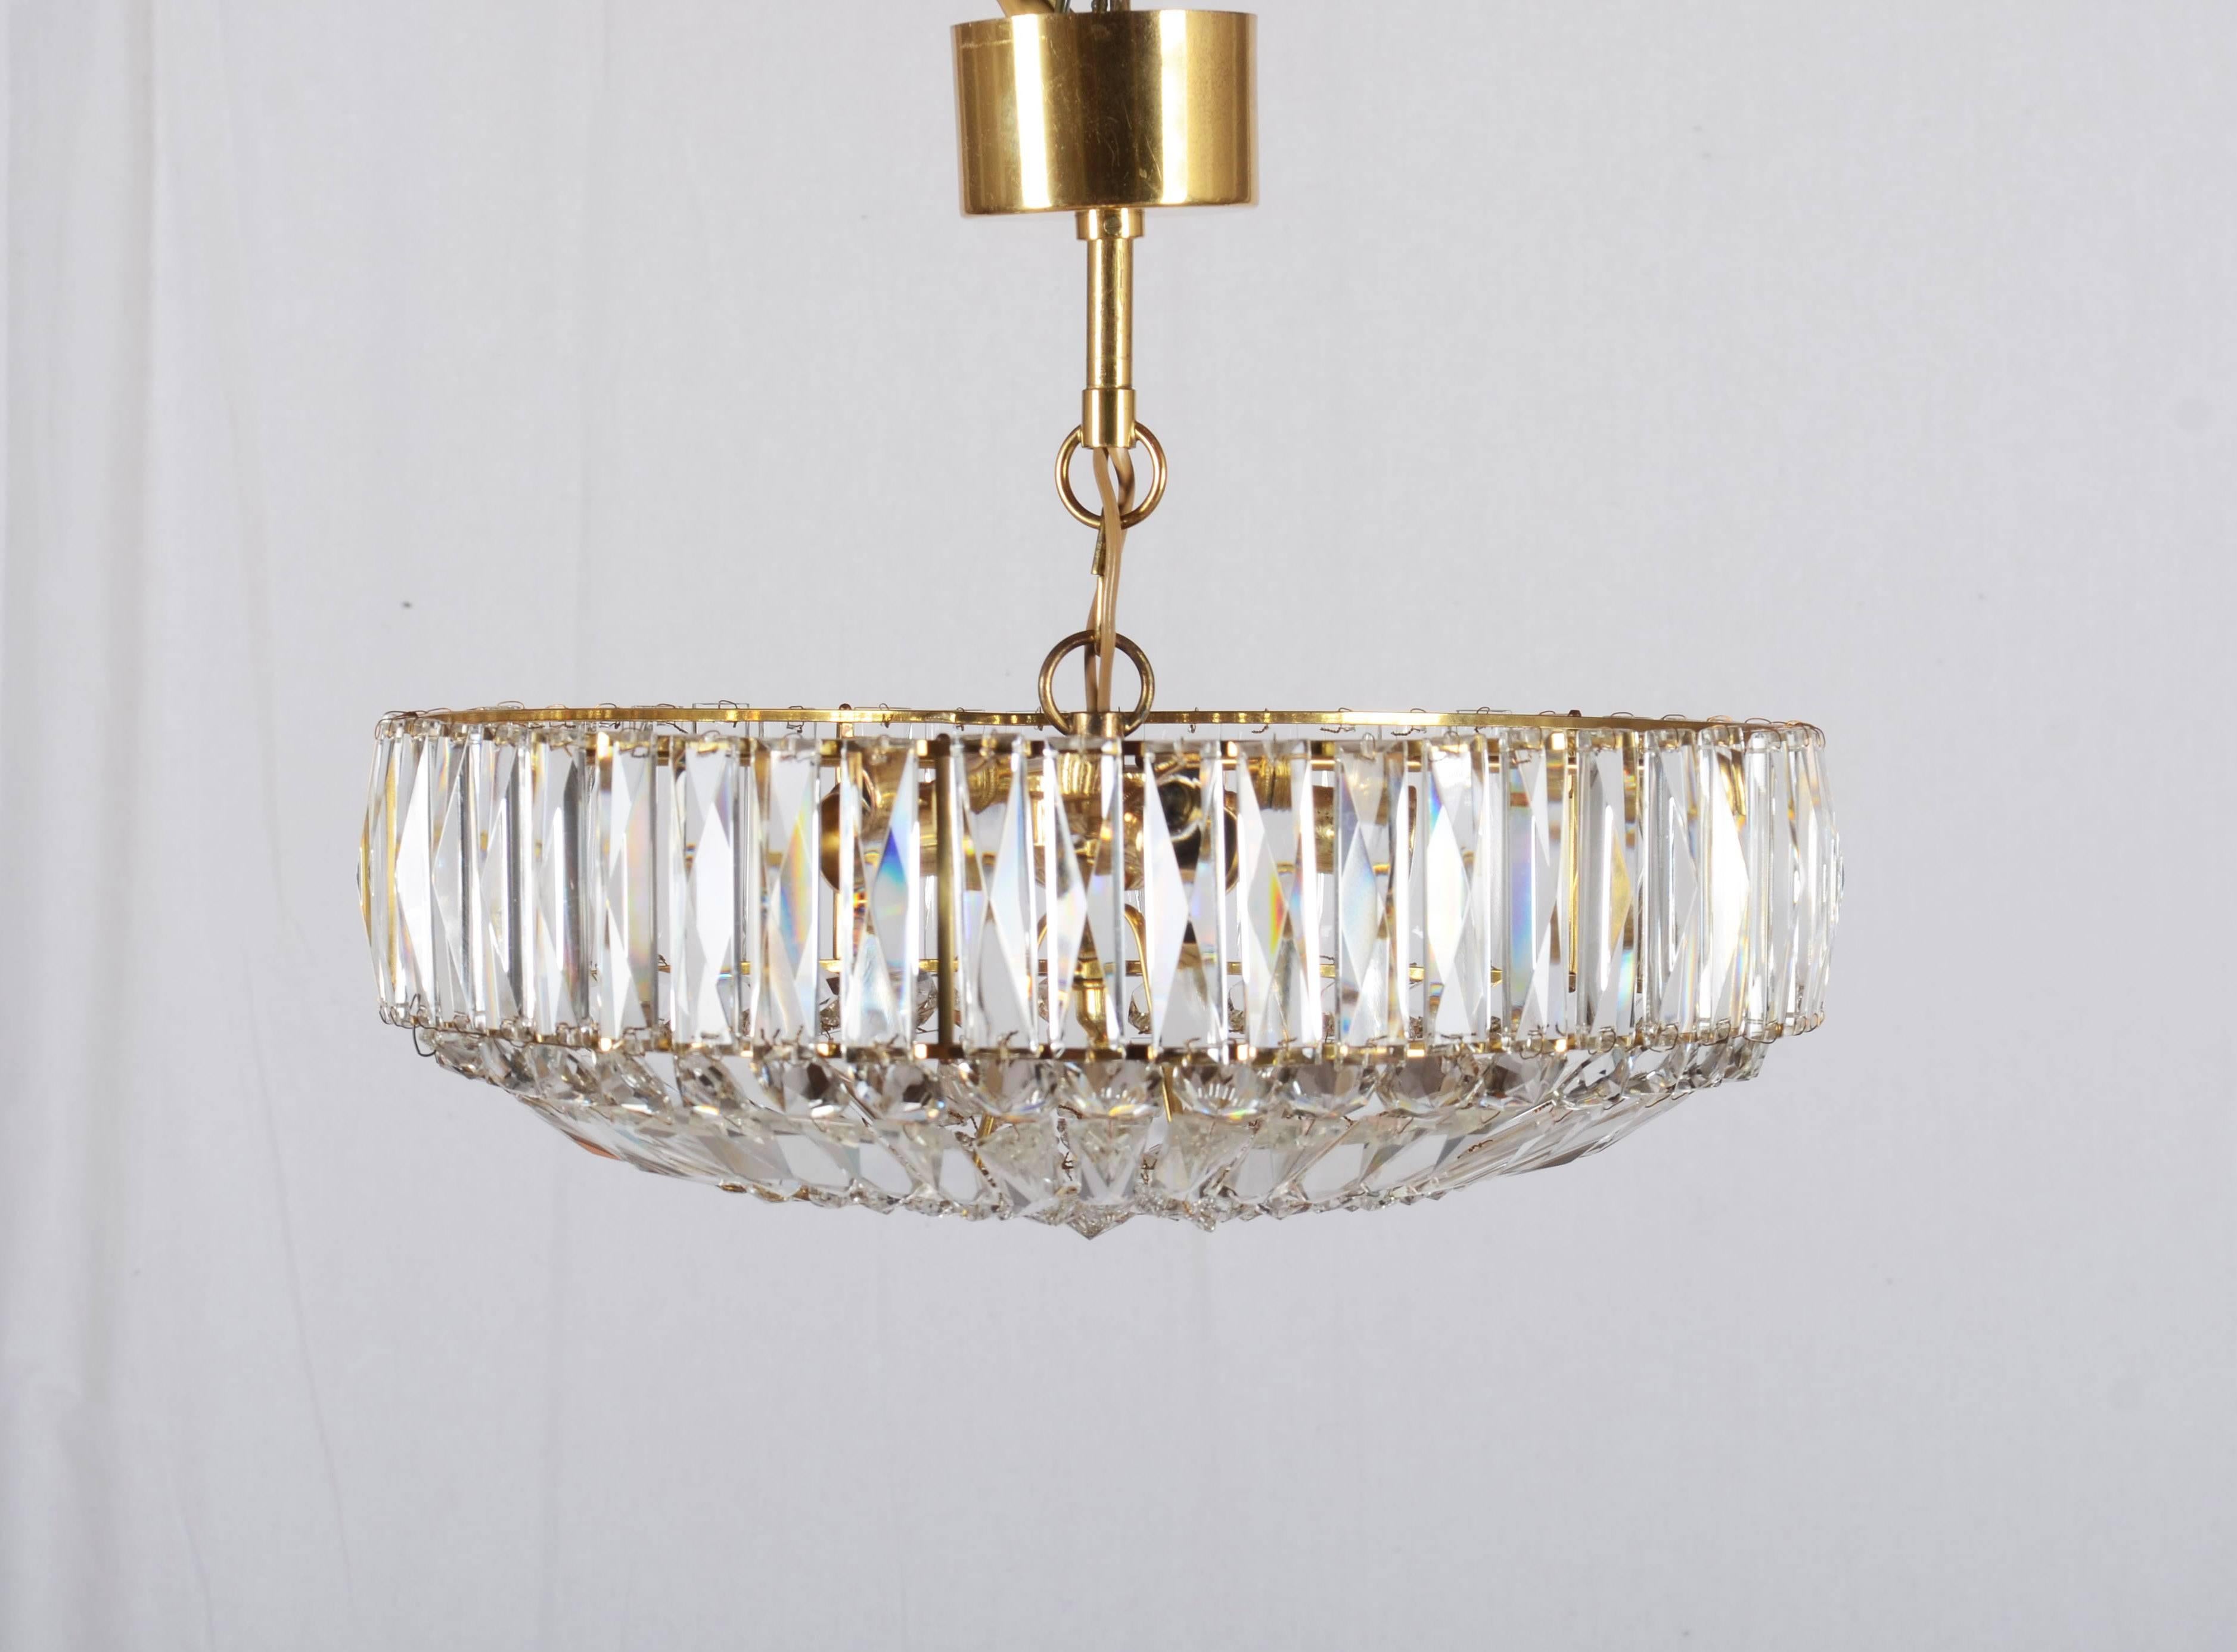 Brass frame with cut crystal elements. Fitted with five E14 sockets. Made in Sweden probably in the 1960s.